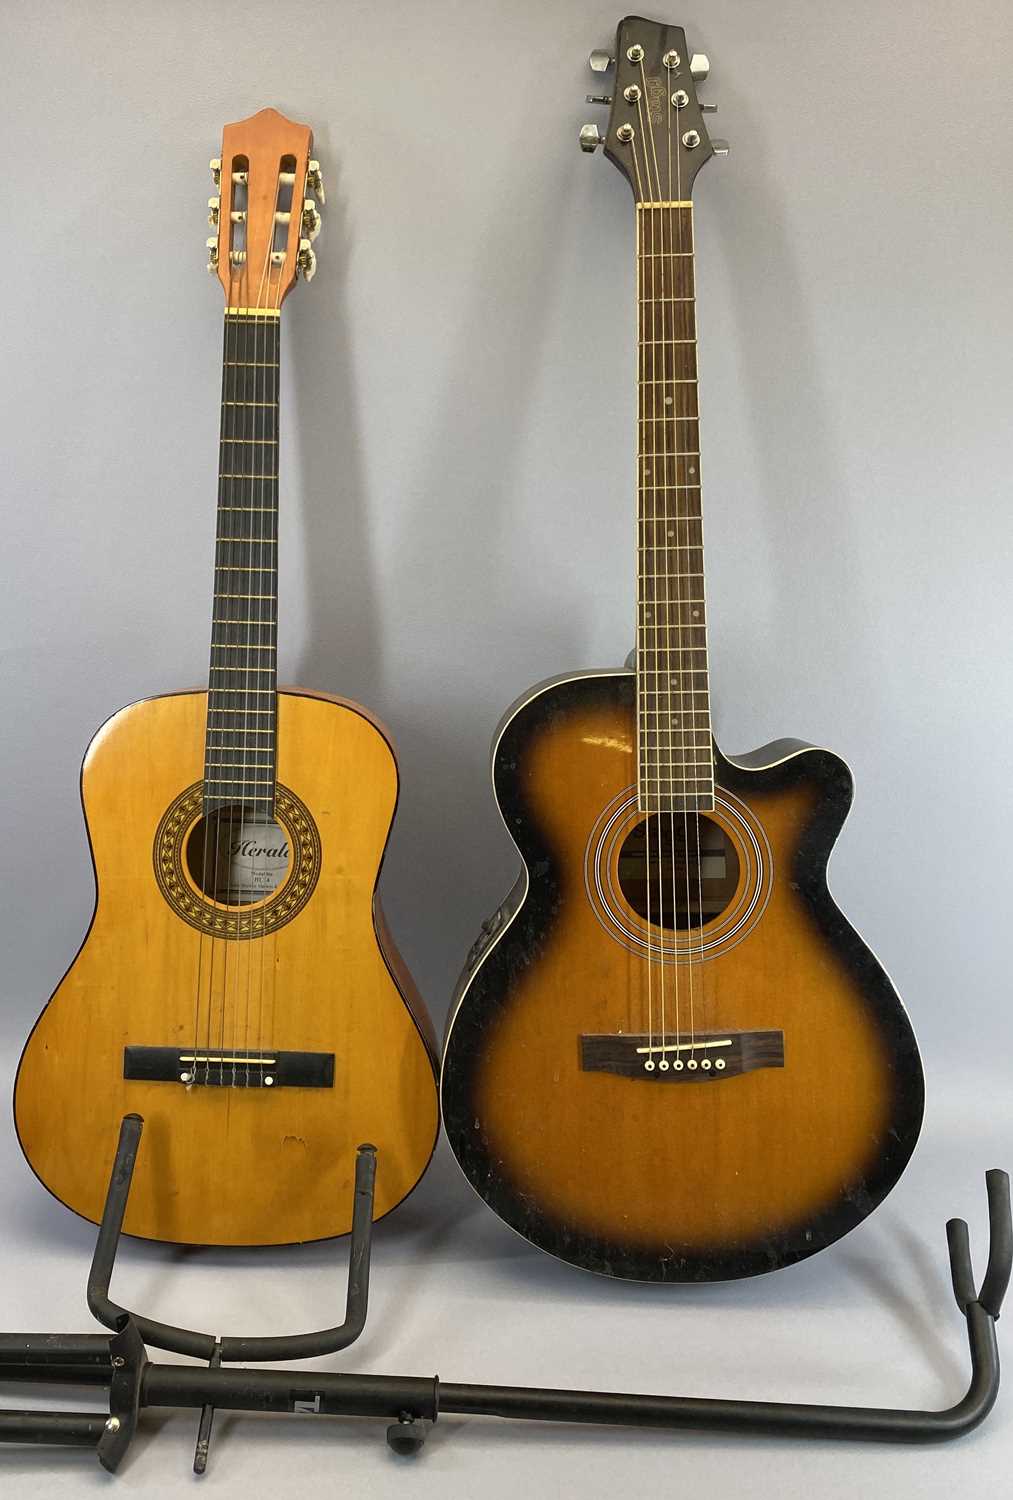 STAGG ACOUSTIC GUITAR & ONE OTHER along with a single guitar stand, interior label marked 'Stagg